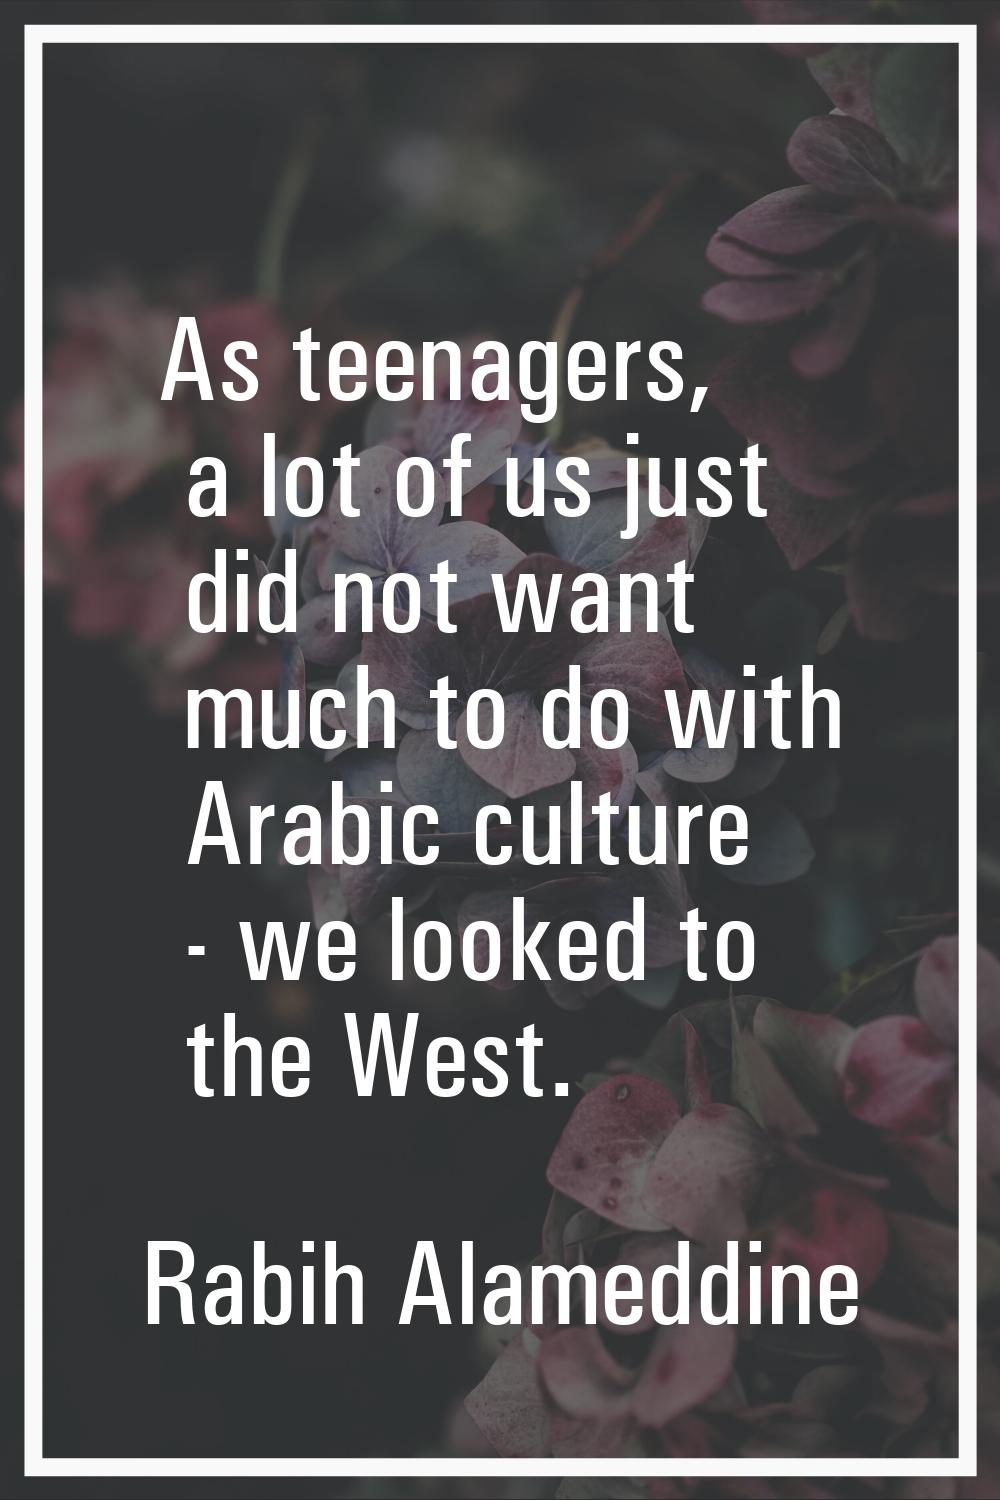 As teenagers, a lot of us just did not want much to do with Arabic culture - we looked to the West.